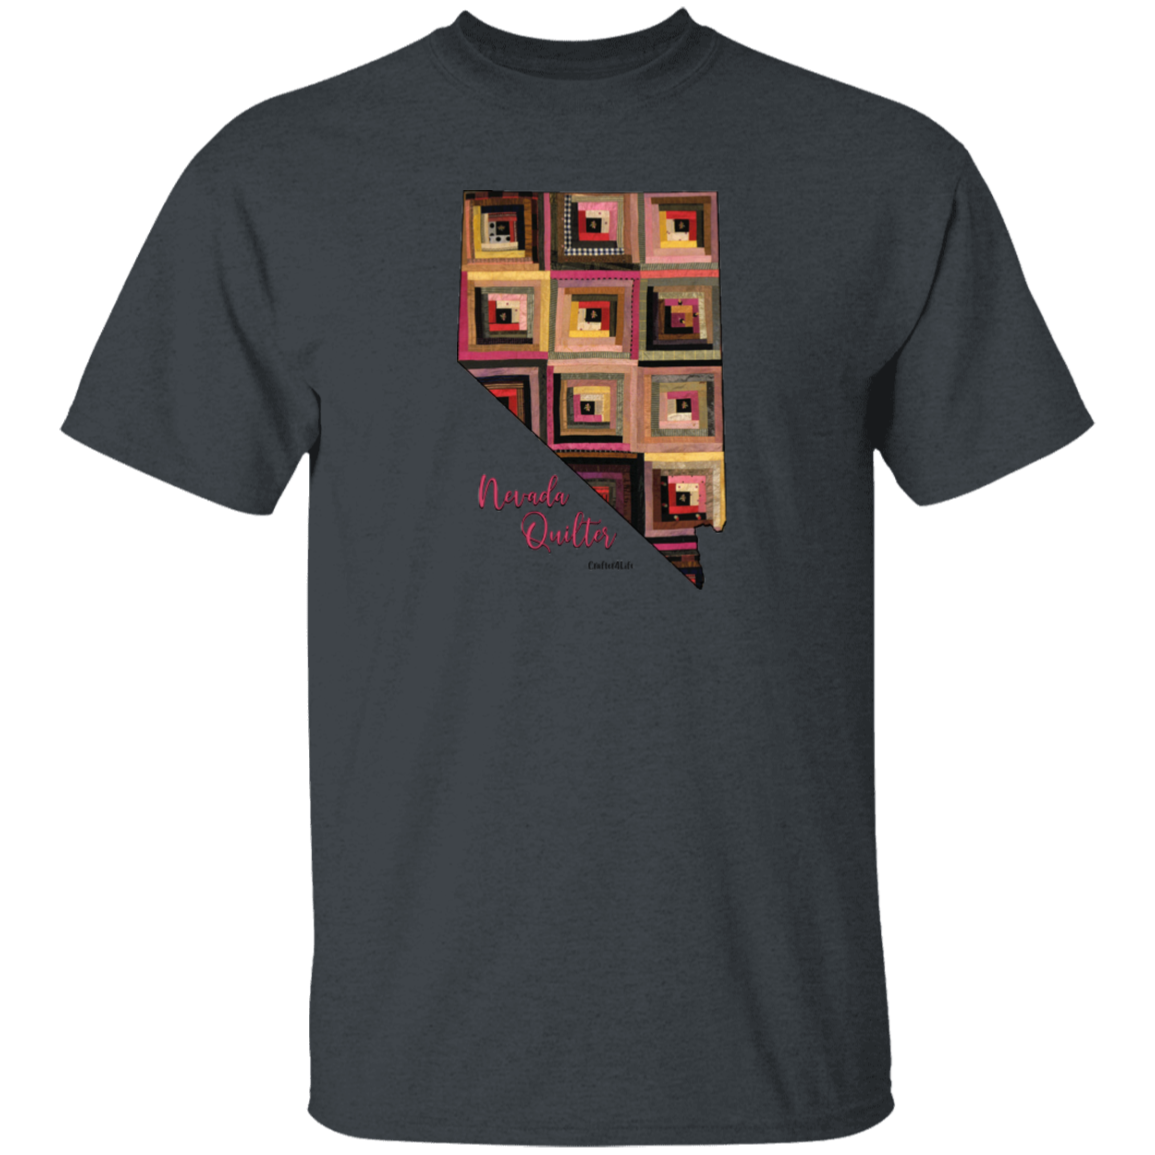 Nevada Quilter T-Shirt, Gift for Quilting Friends and Family